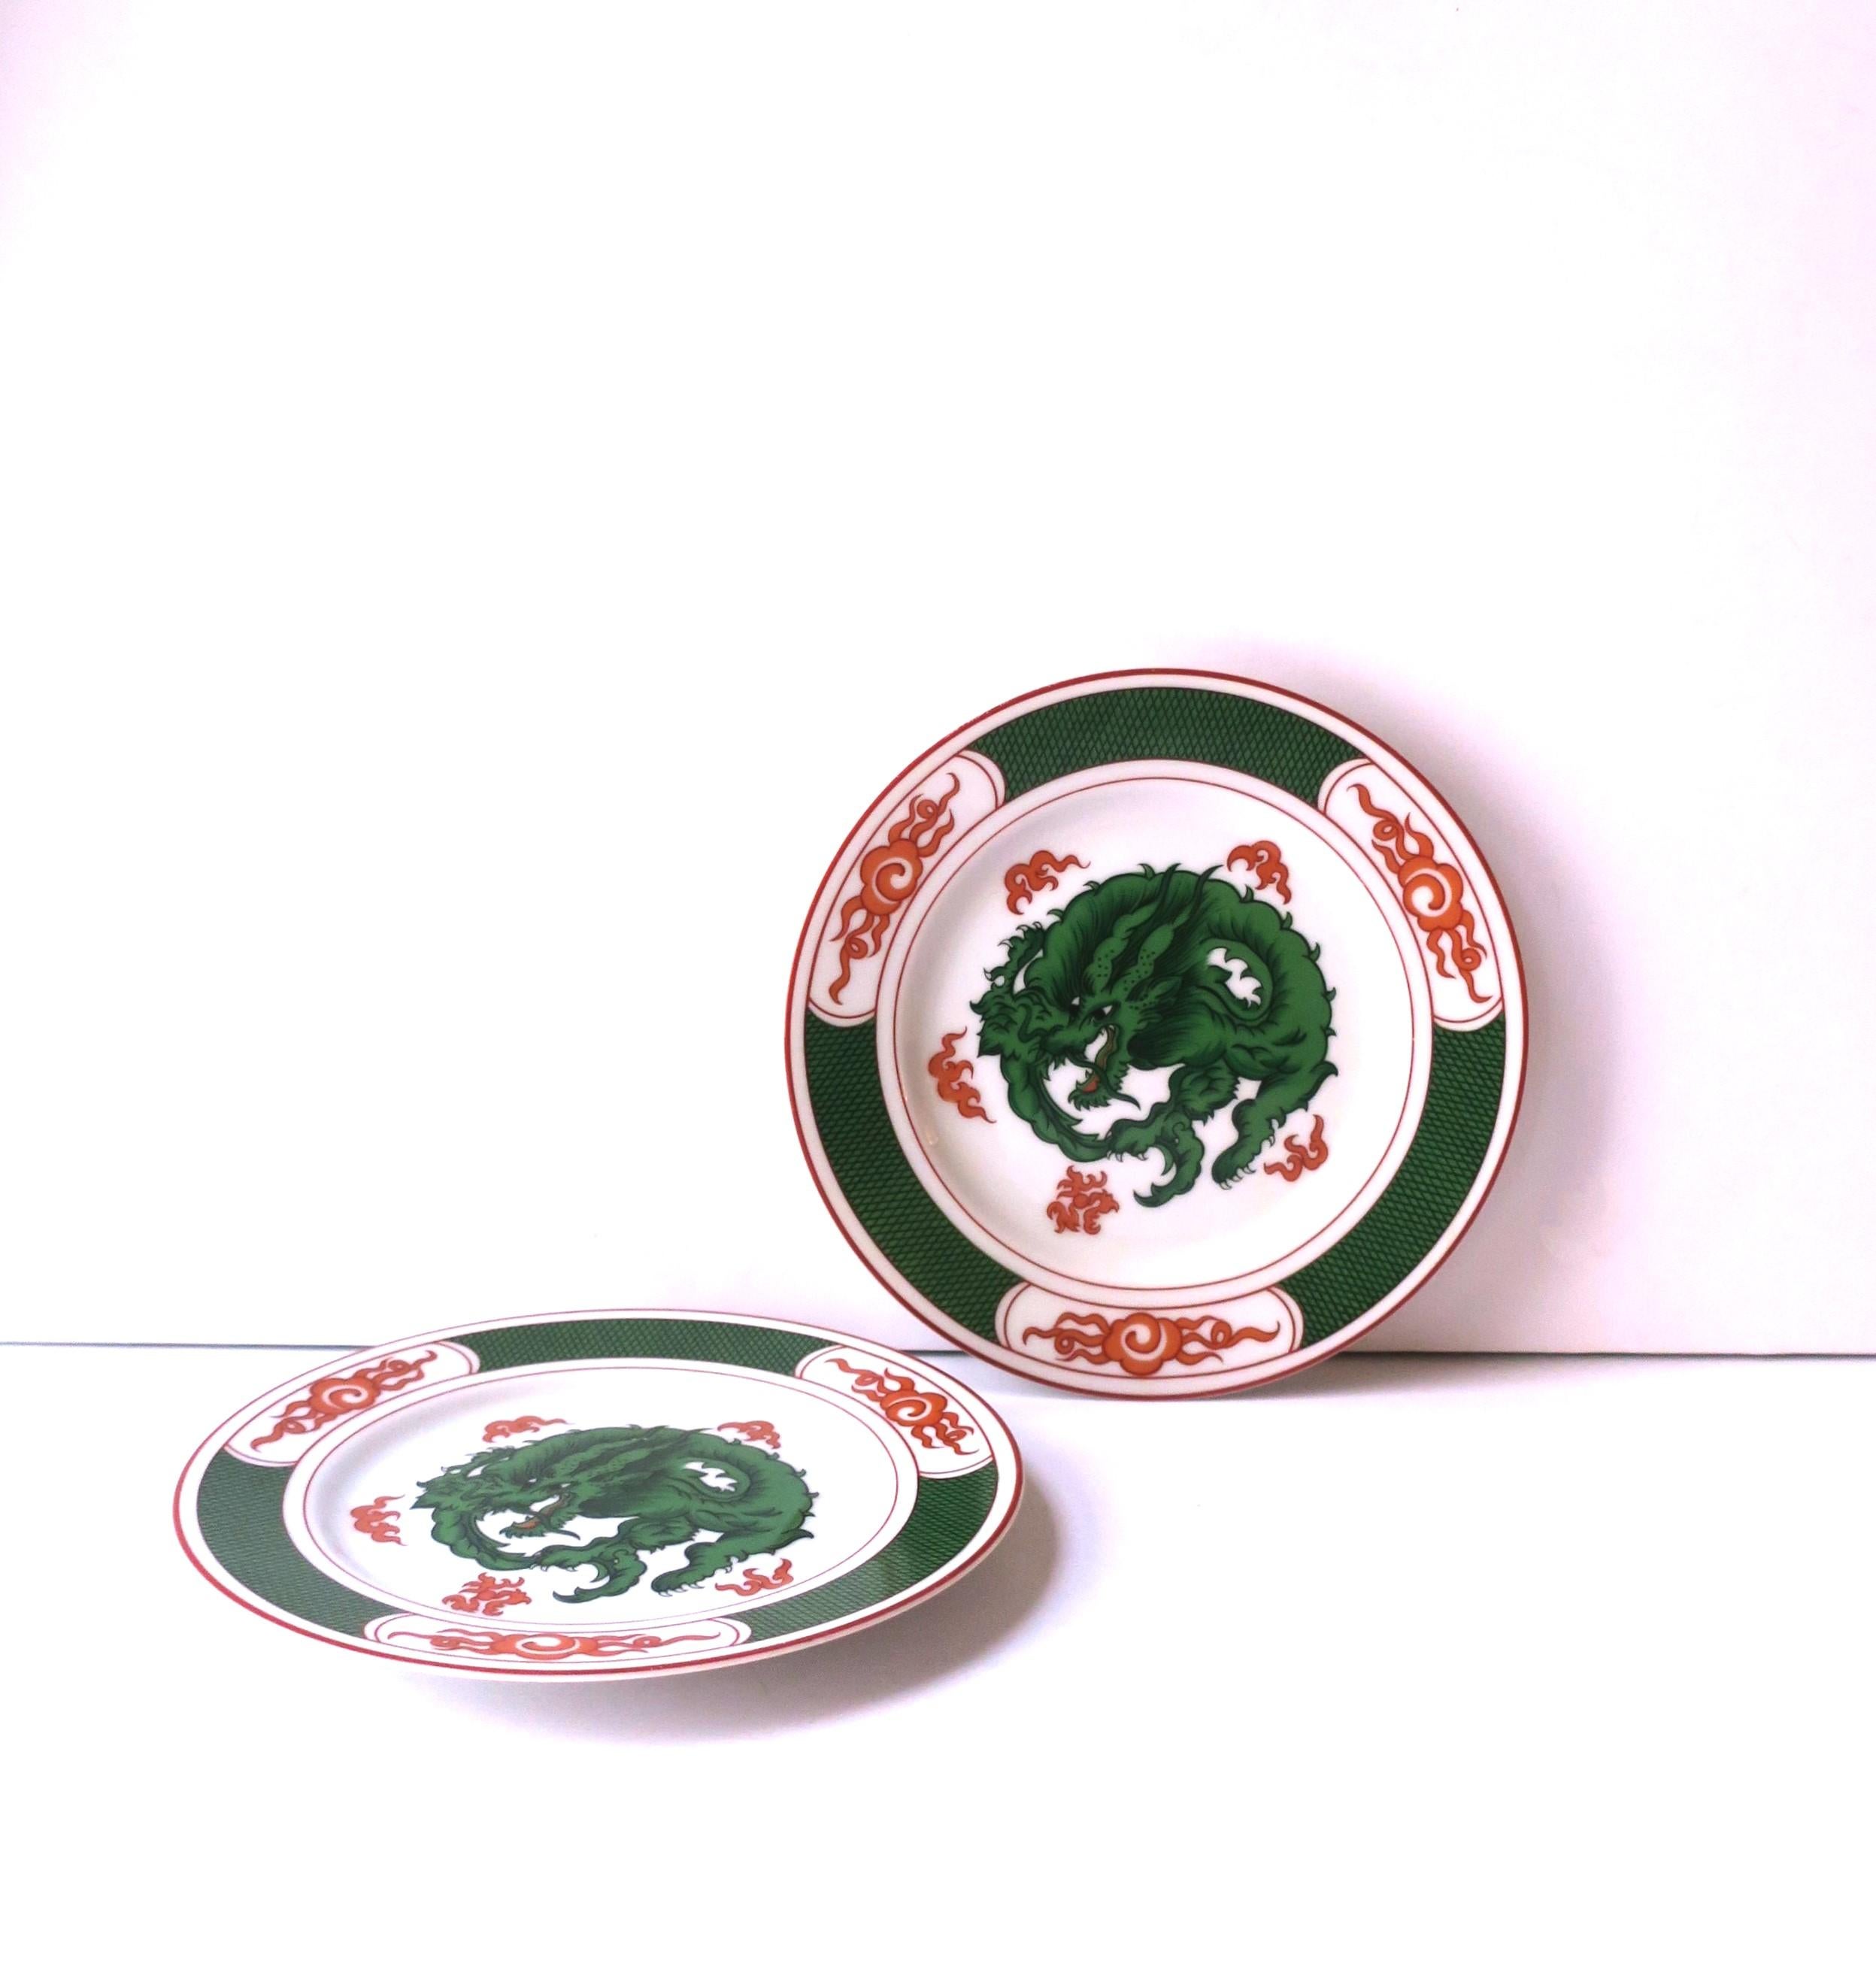 Porcelain Plates with Dragon Design, Set of 2 In Good Condition For Sale In New York, NY